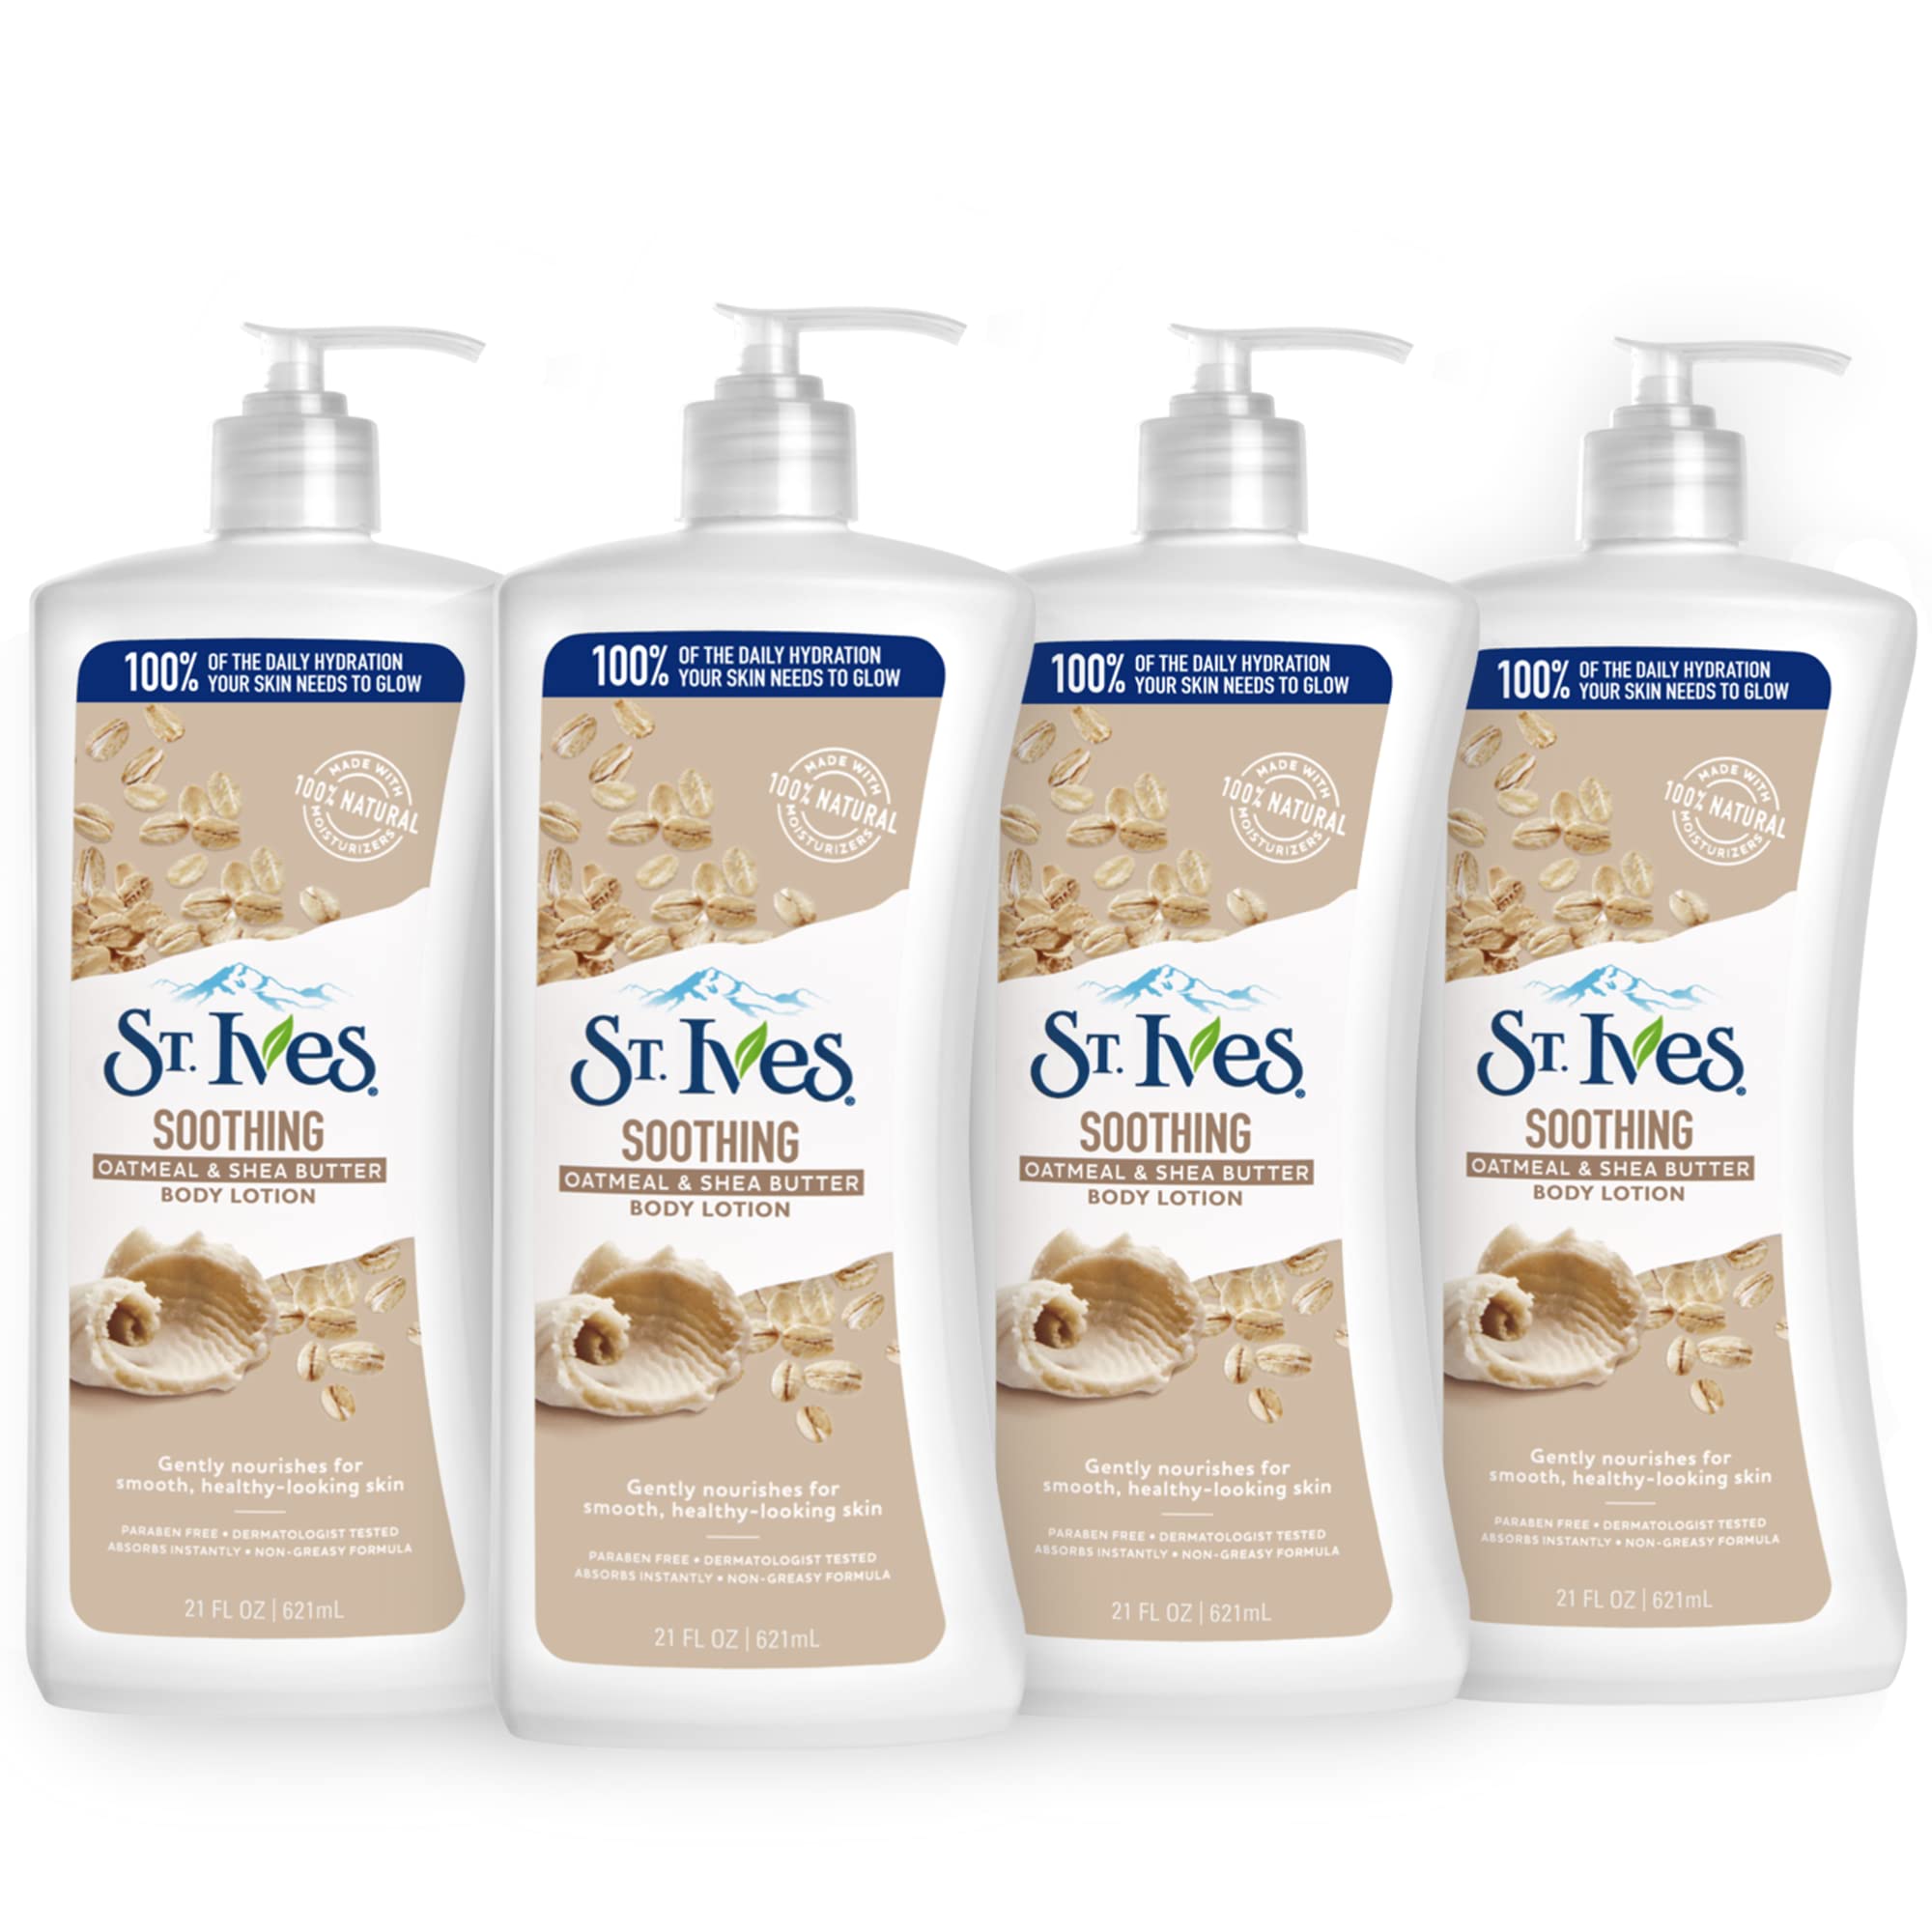 4-Pack 21-Oz St. Ives Renewing Hand & Body Lotion Moisturizer (Oatmeal and Shea Butter) $12.77 w/ S&S + Free Shipping w/ Prime or on orders over $35